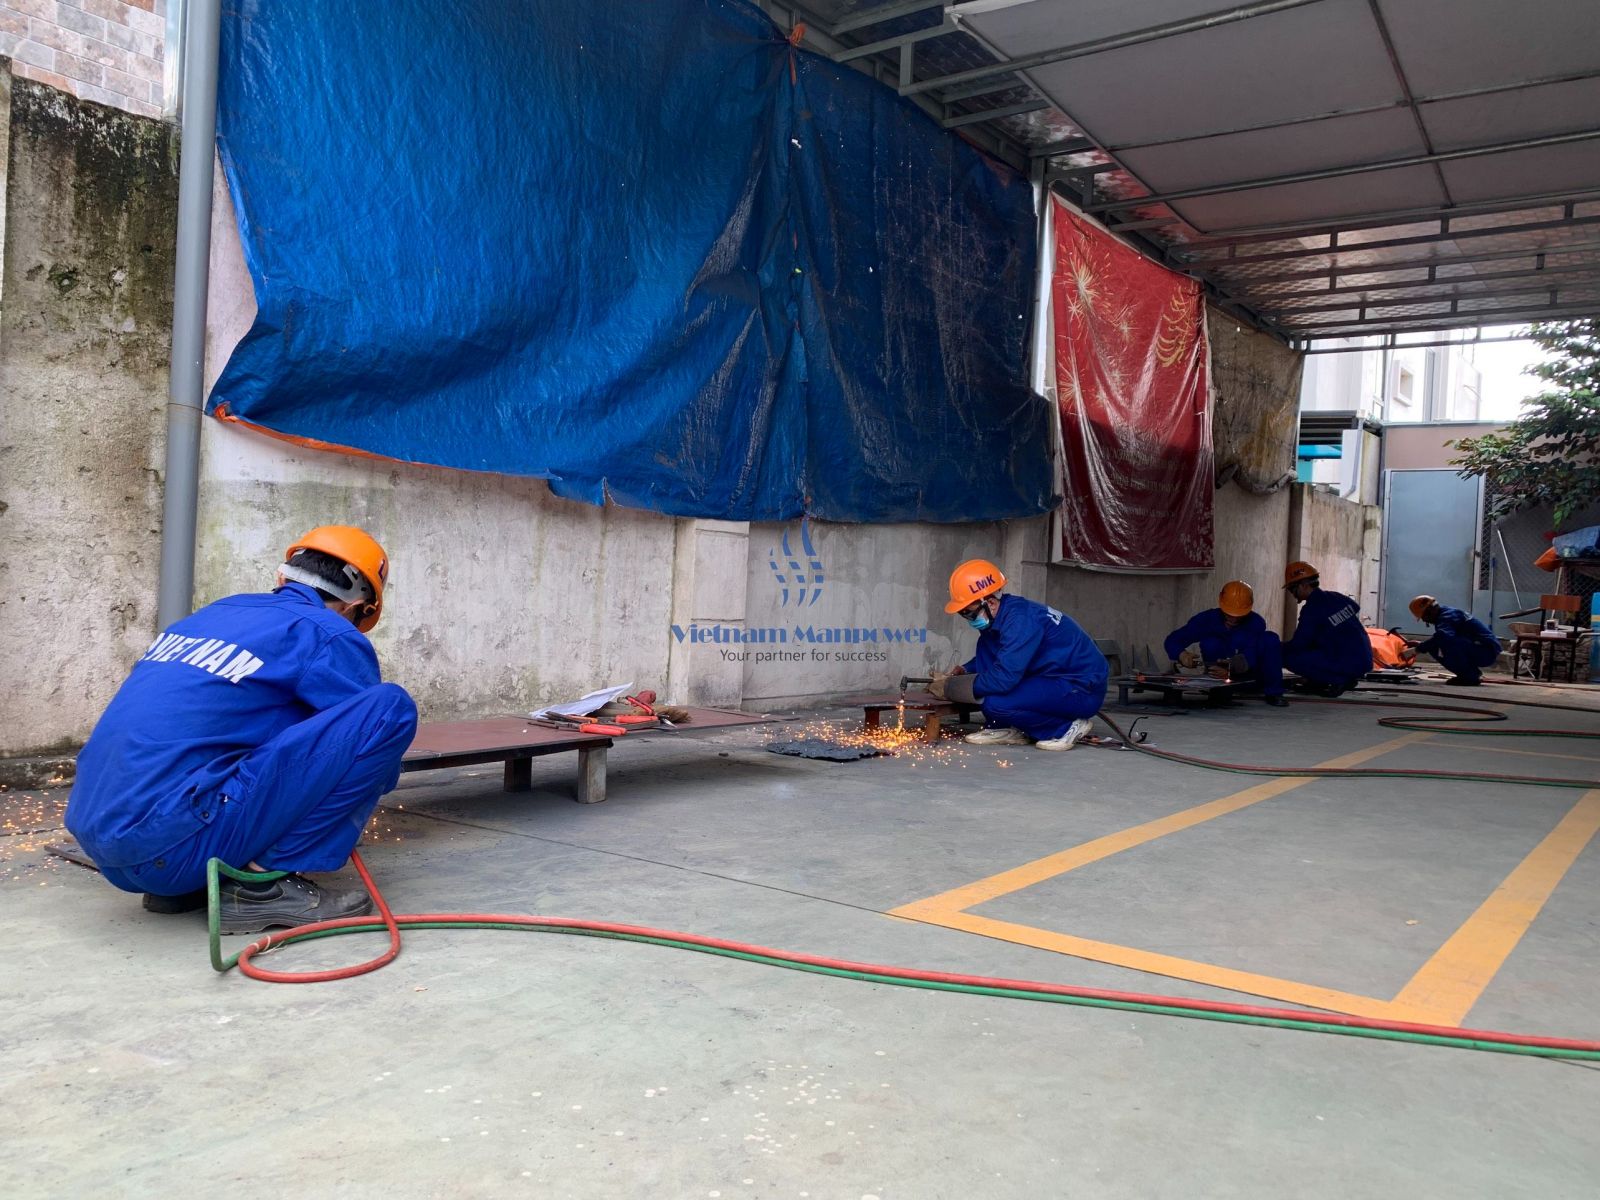 Vietnam Manpower supplied fitter for shipbuilding factory in Romania (19/09/2023)